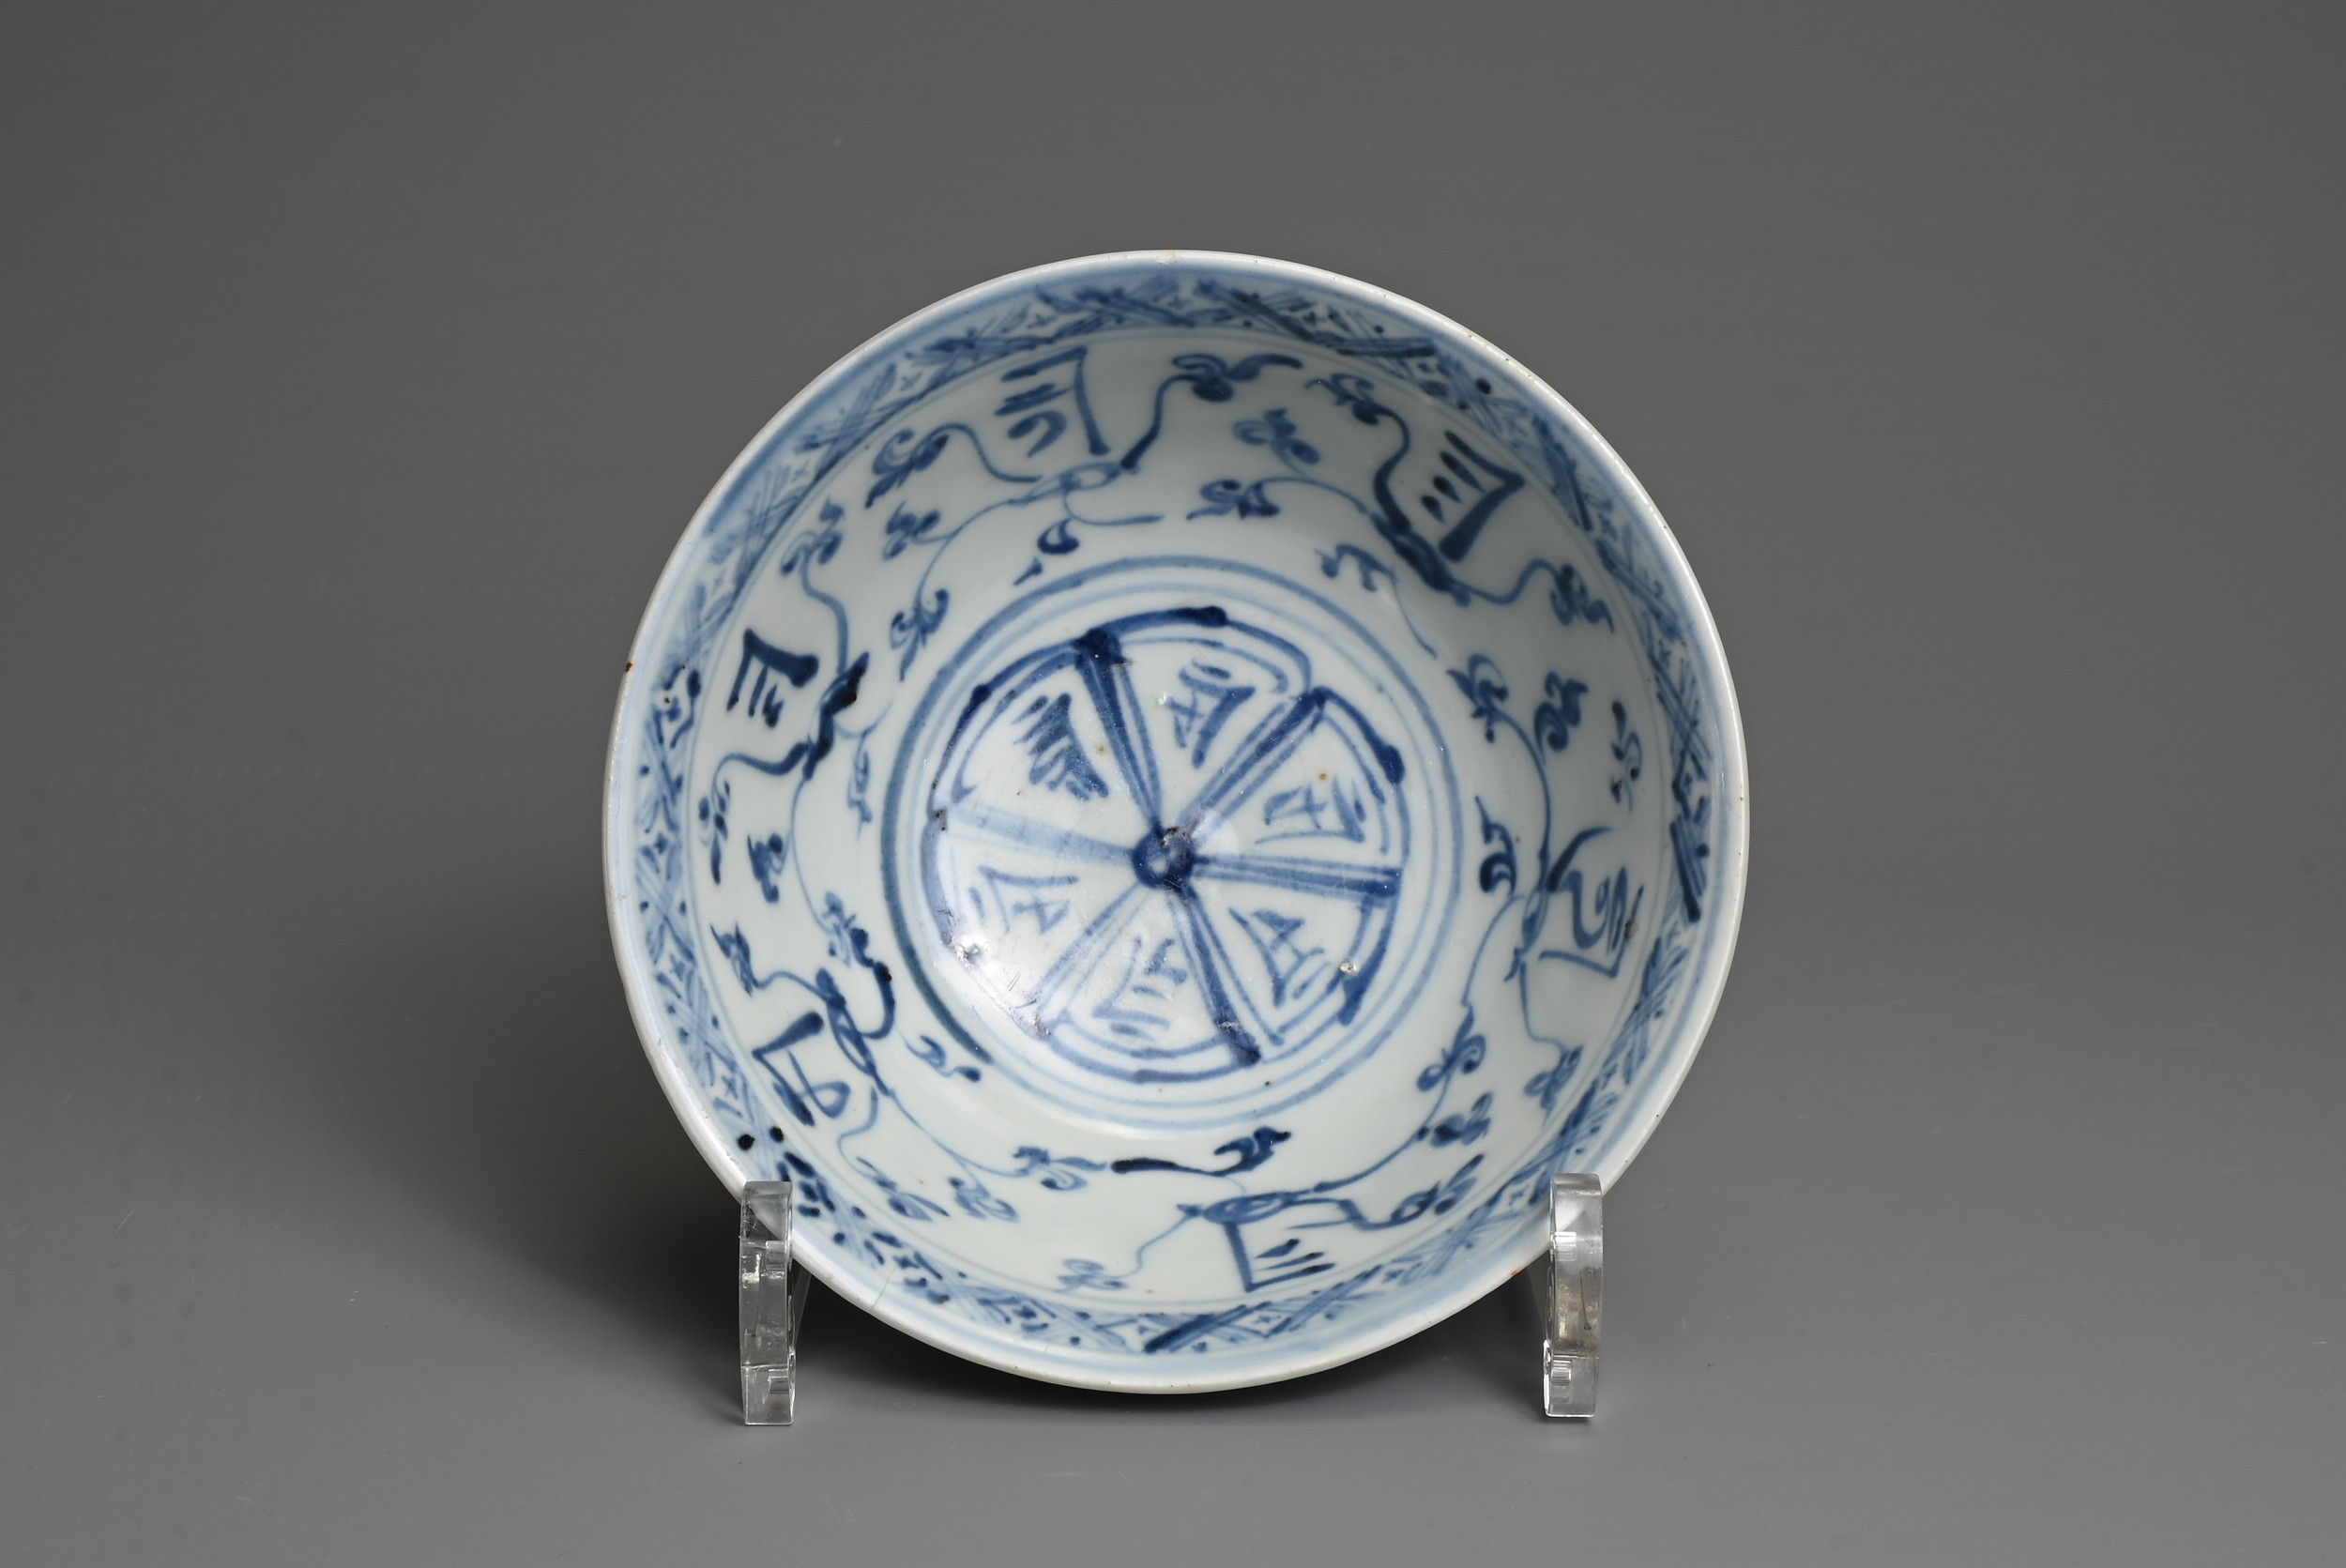 A CHINESE BLUE AND WHITE PORCELAIN BOWL, MING DYNASTY. Decorated with lotus scrolls and Buddhist - Image 4 of 7